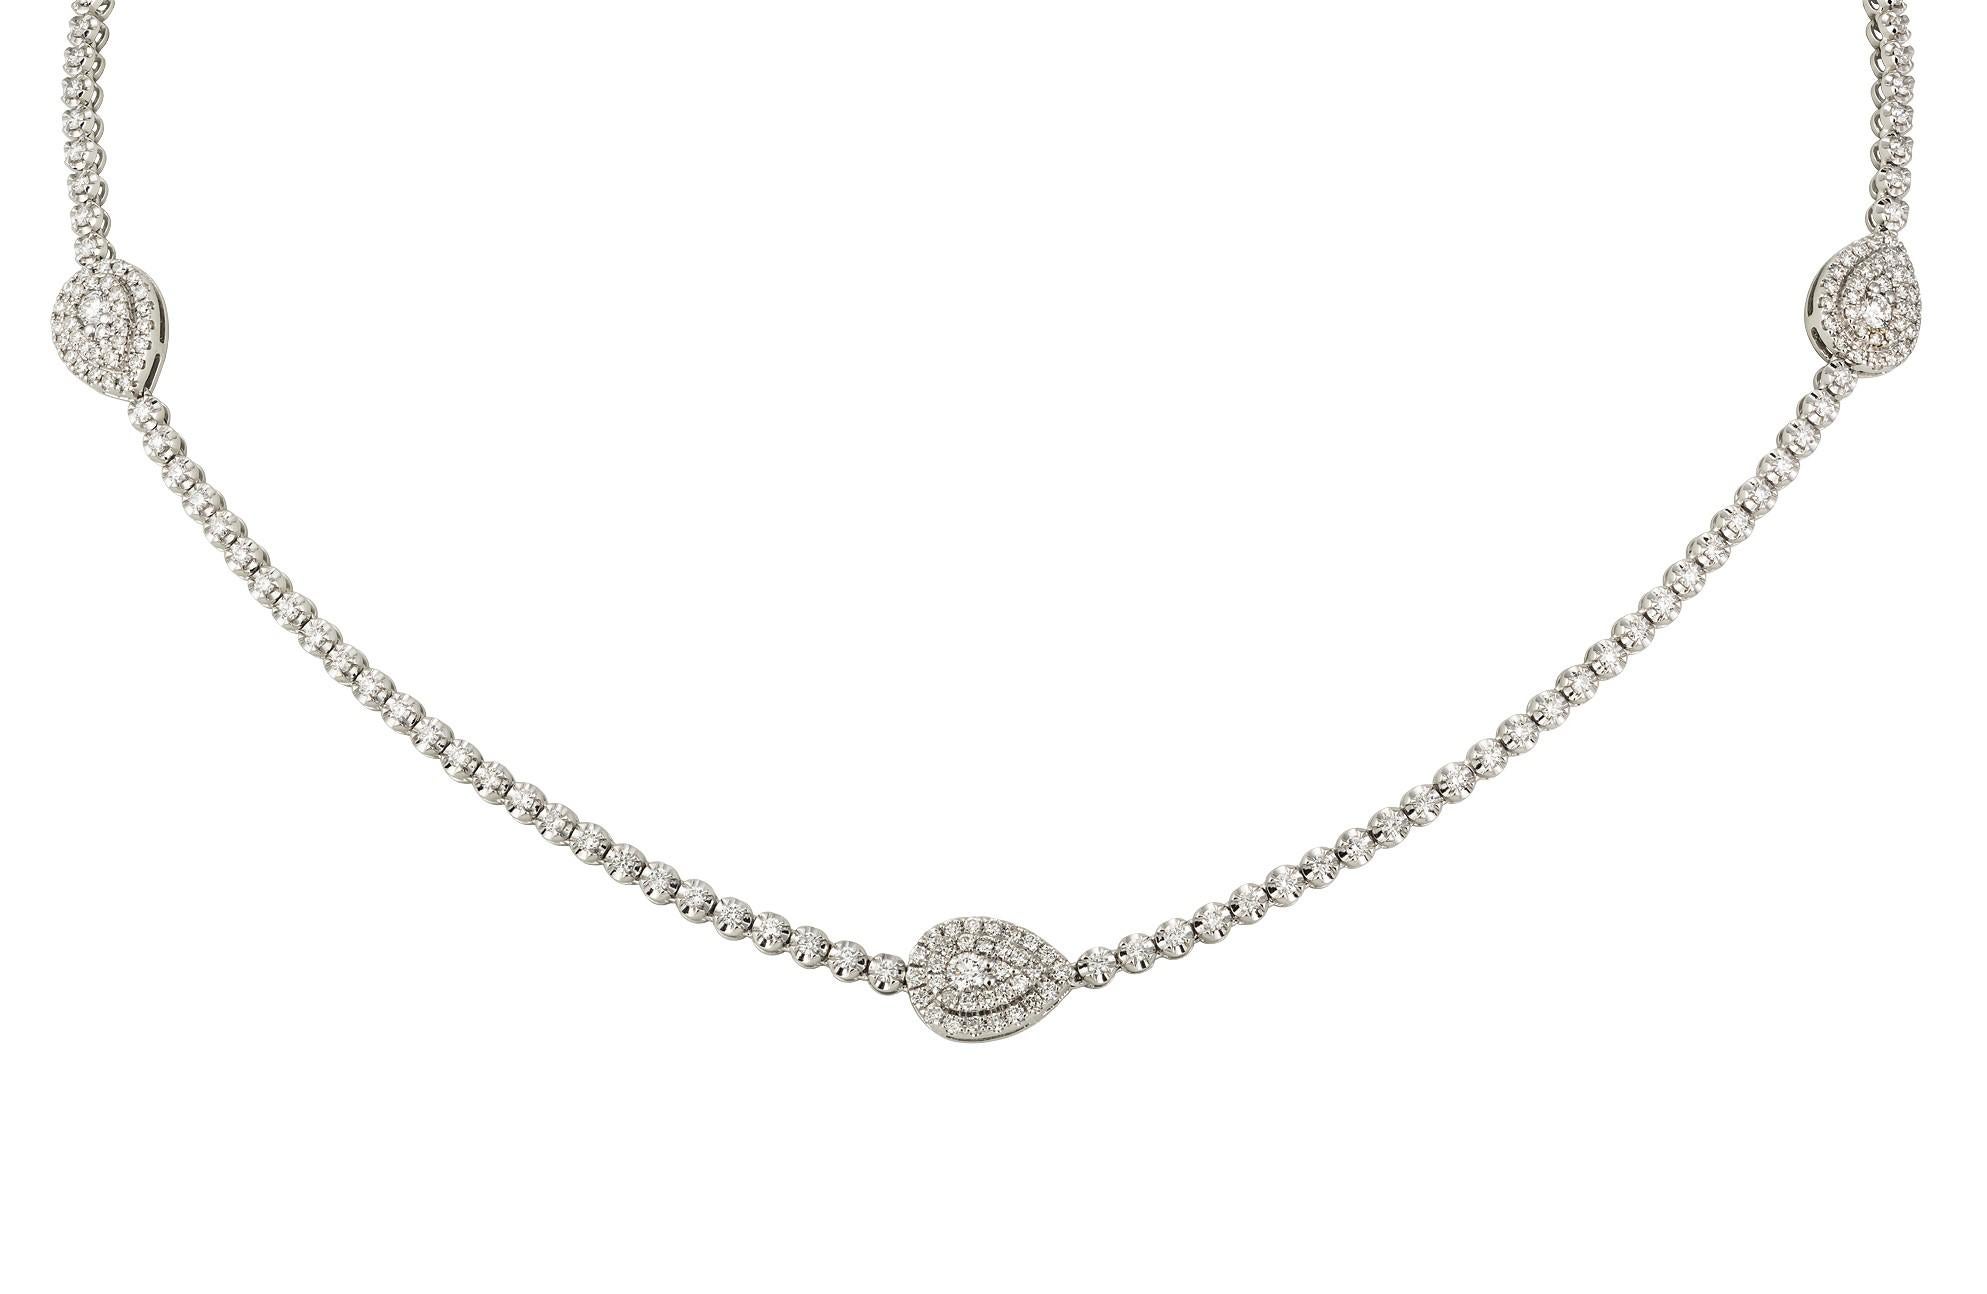 The Following Item we are offering is this Rare Important Radiant 18KT Gold Gorgeous Glittering and Sparkling Magnificent Fancy Pear Shaped and Round Diamond Necklace. Necklace Contains approx over 3.50CTS of Beautiful Fancy Pear and Round